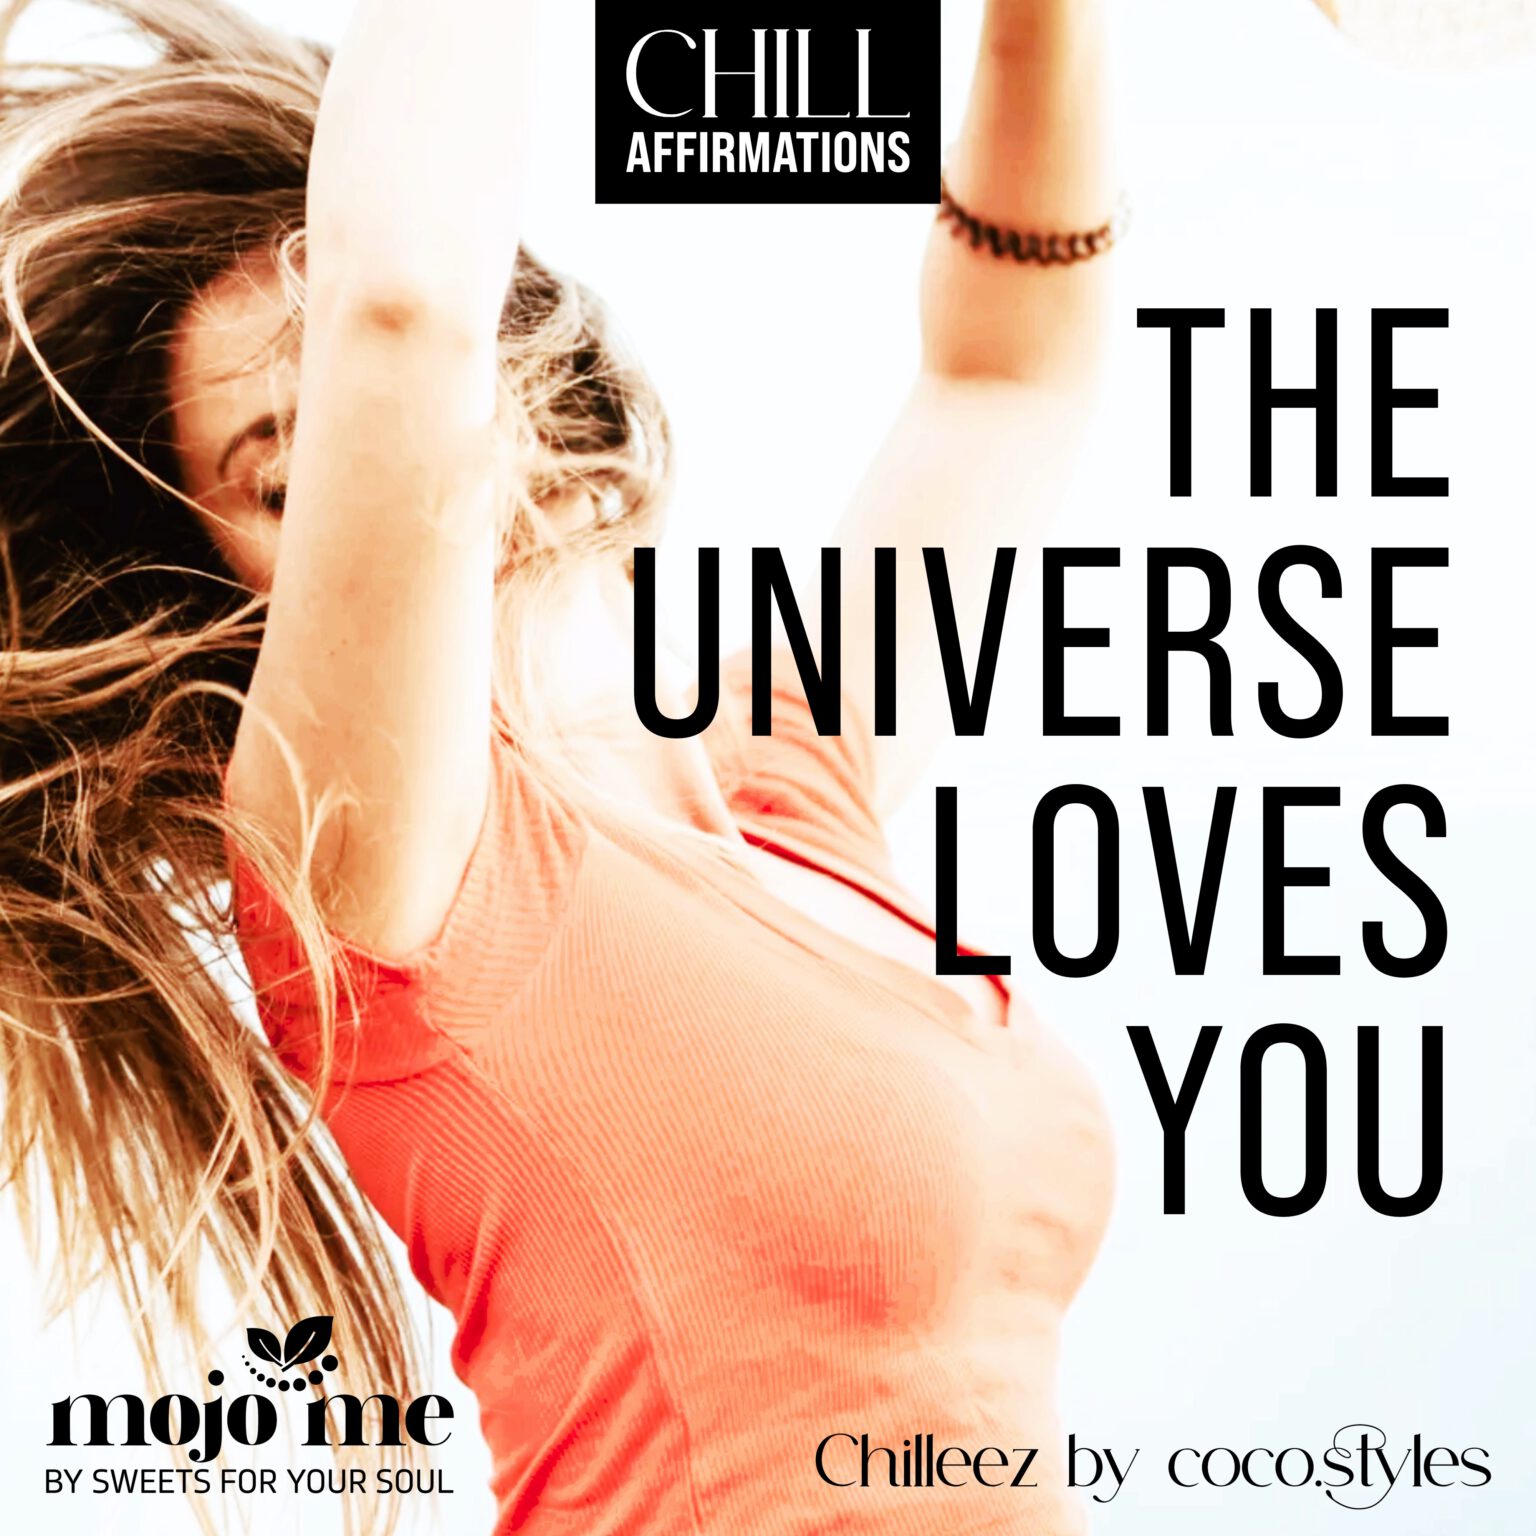 The universe loves you - Chilleez